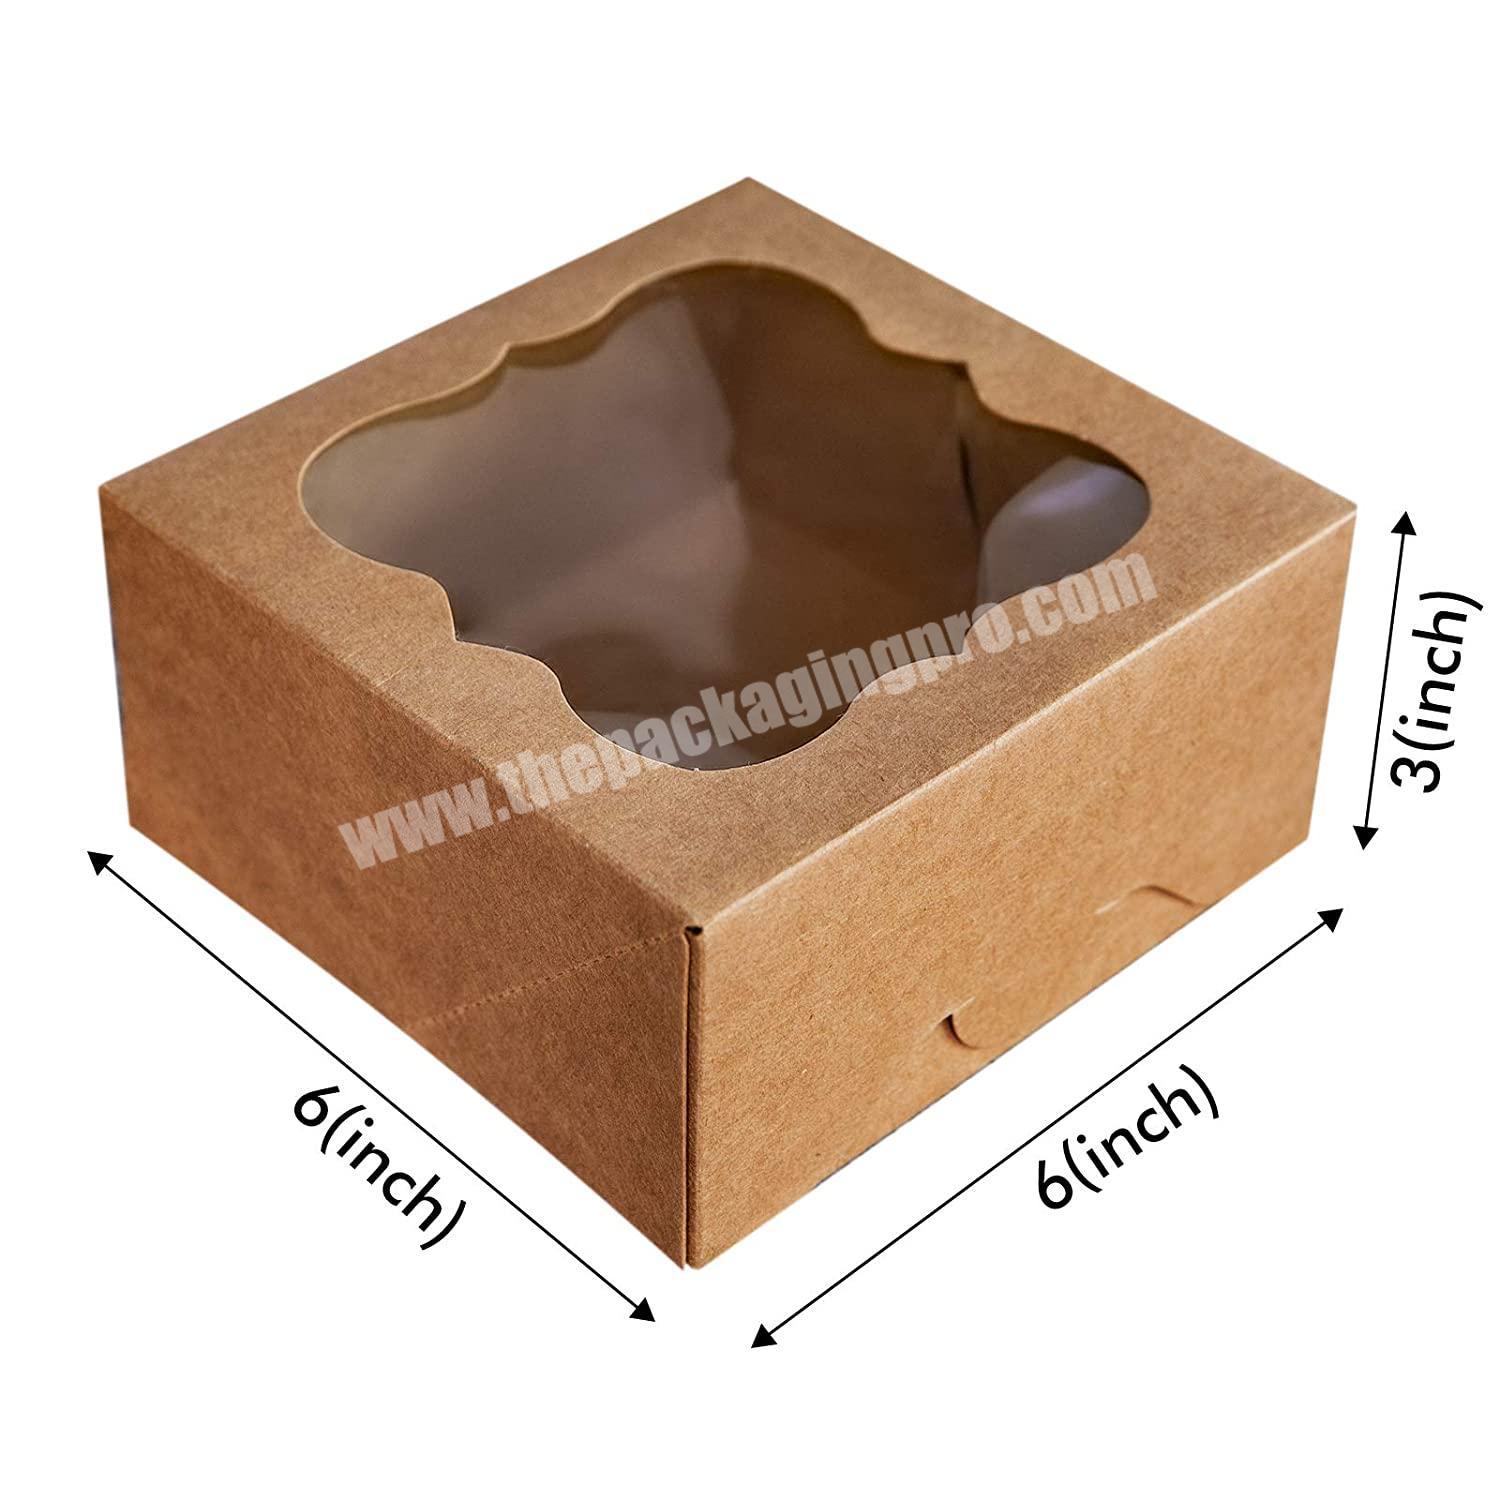 Free Sample  6x6x3 inch Brown Craft Paper Bakery Boxes with PVC Window for Pie and Cookies Boxes Small Natural  Pastry Box